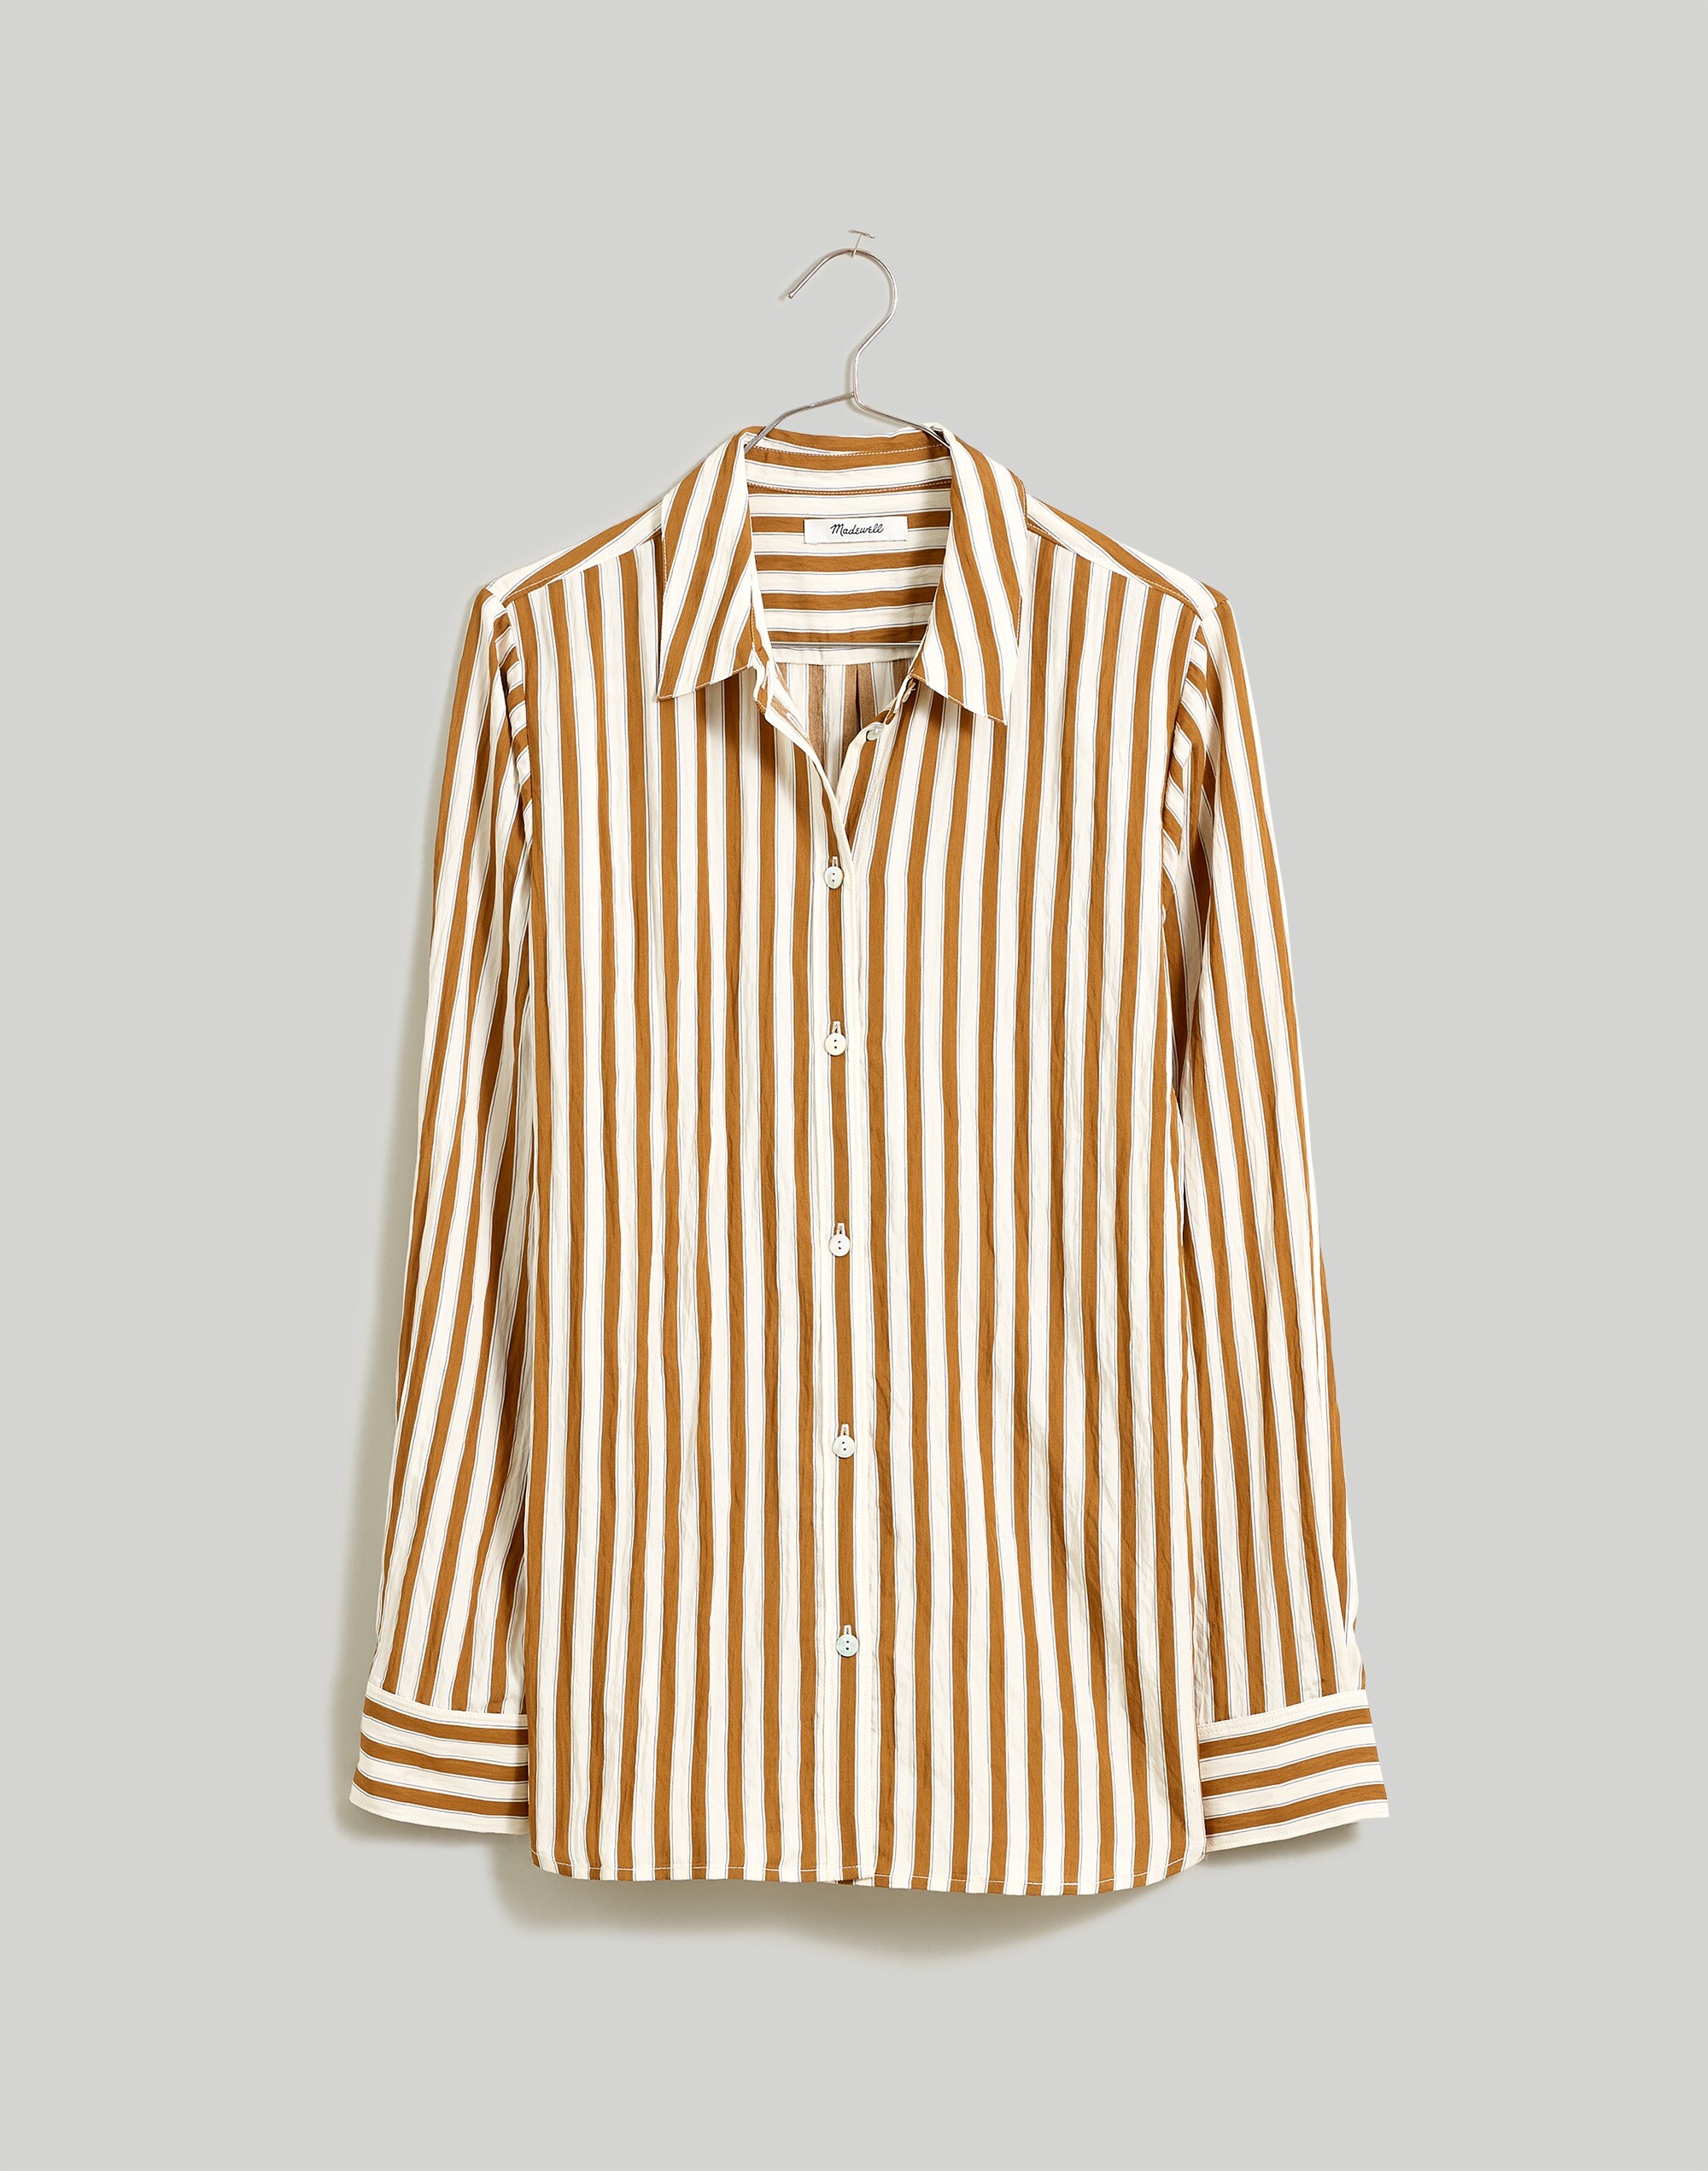 Crinkled Button-Up Shirt in Stripe